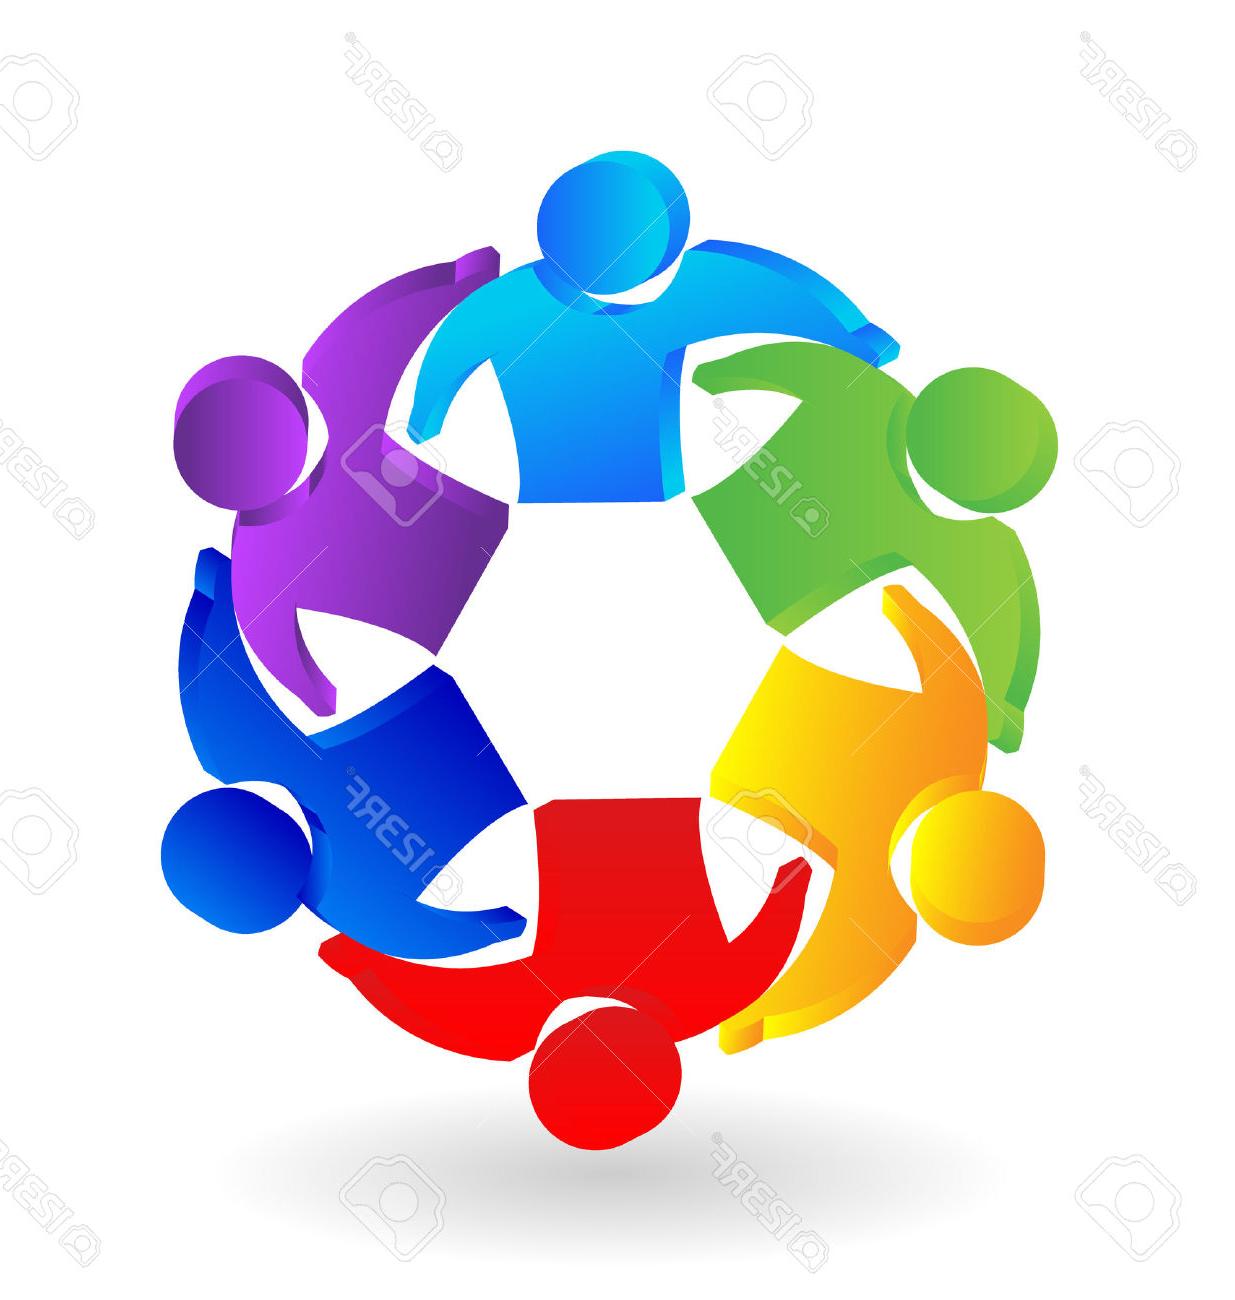 Images for free download. Teamwork clipart icon